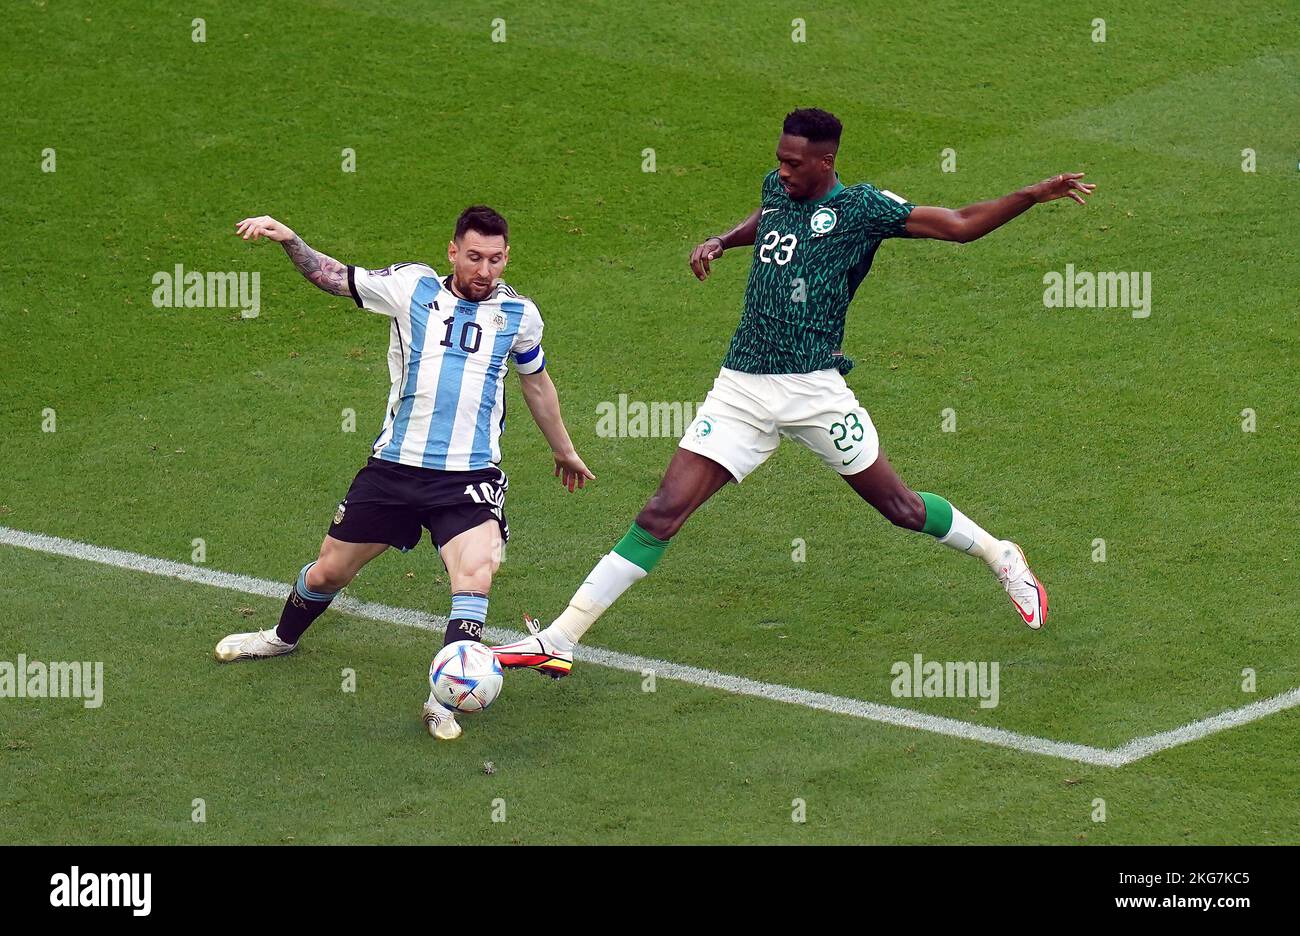 Argentina's Lionel Messi (left) and Saudi Arabia's Mohamed Kanno battle for the ball during the FIFA World Cup Group C match at the Lusail Stadium, Qatar. Picture date: Tuesday November 22, 2022. Stock Photo